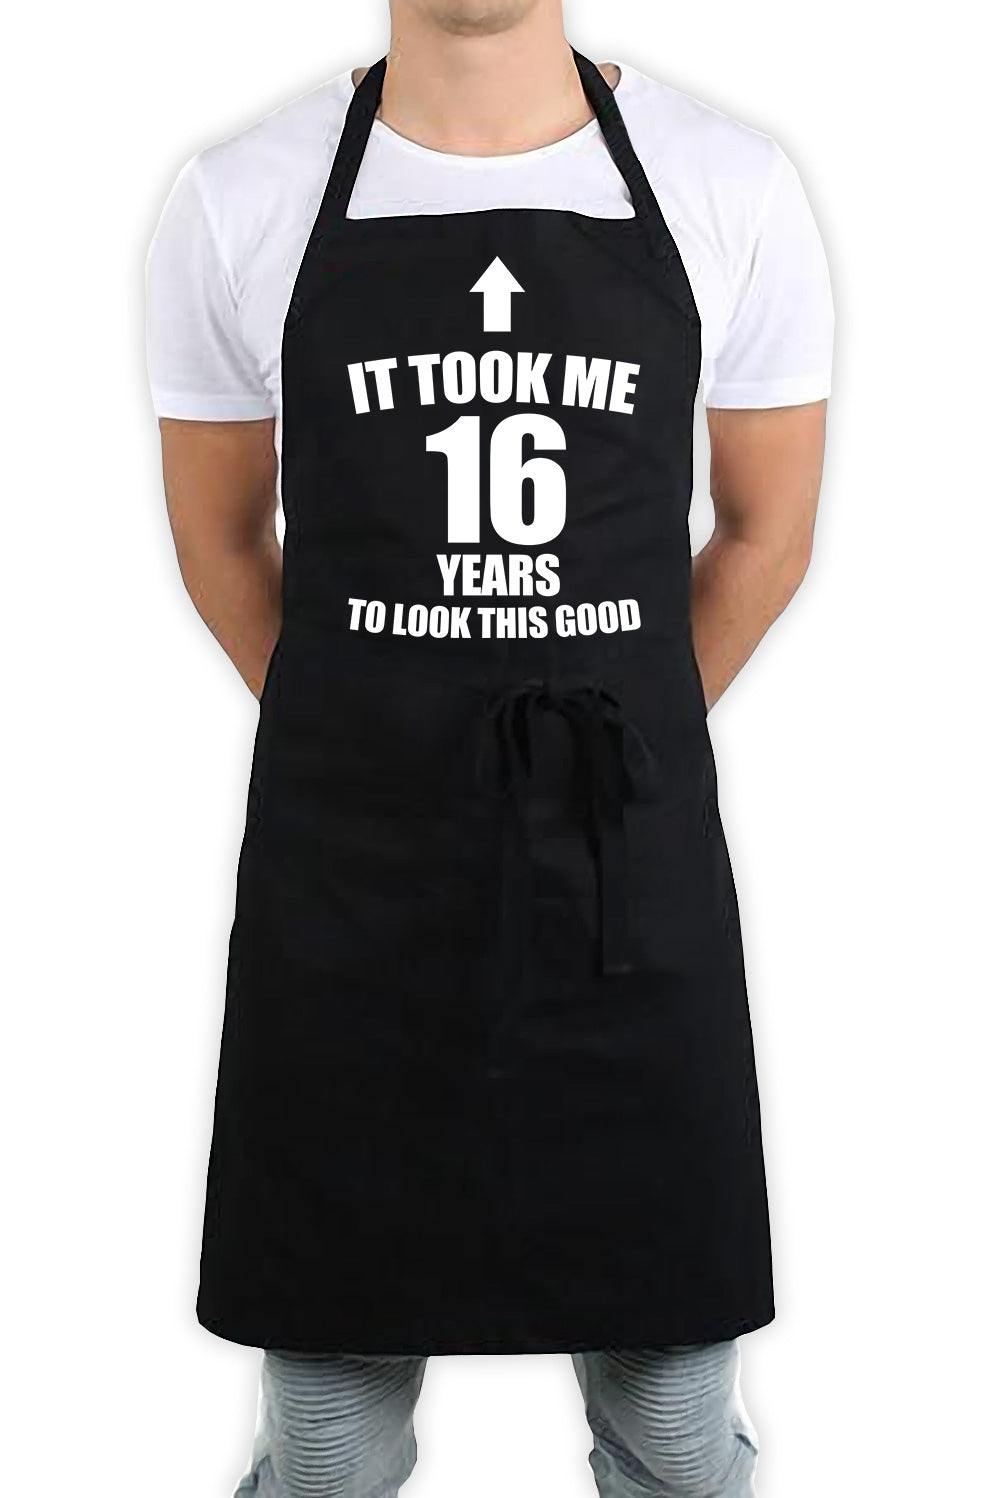 It Took Me 16 Years To Look This Good Funny Kitchen BBQ Apron Black